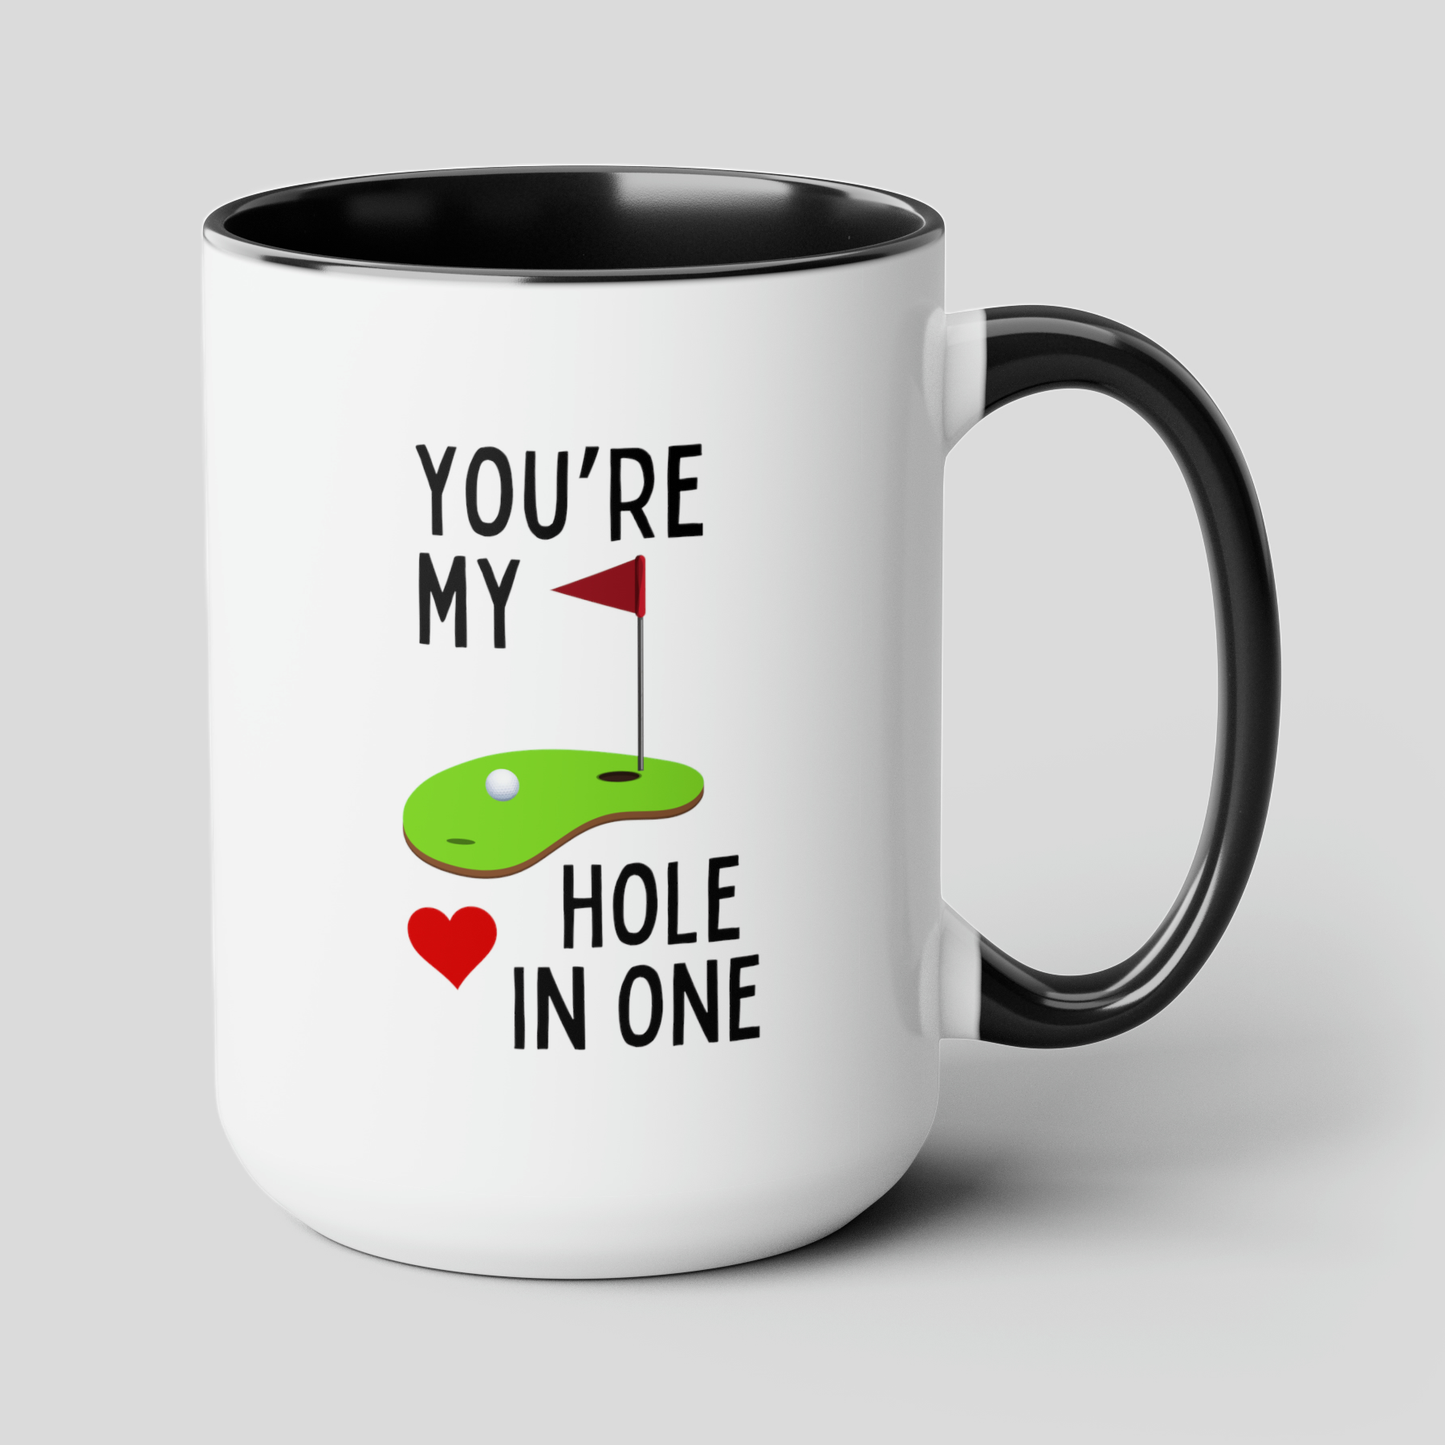 You're My Hole In One 15oz white with black accent funny large coffee mug gift for golf player lover husband boyfriend golfer  waveywares wavey wares wavywares wavy wares cover